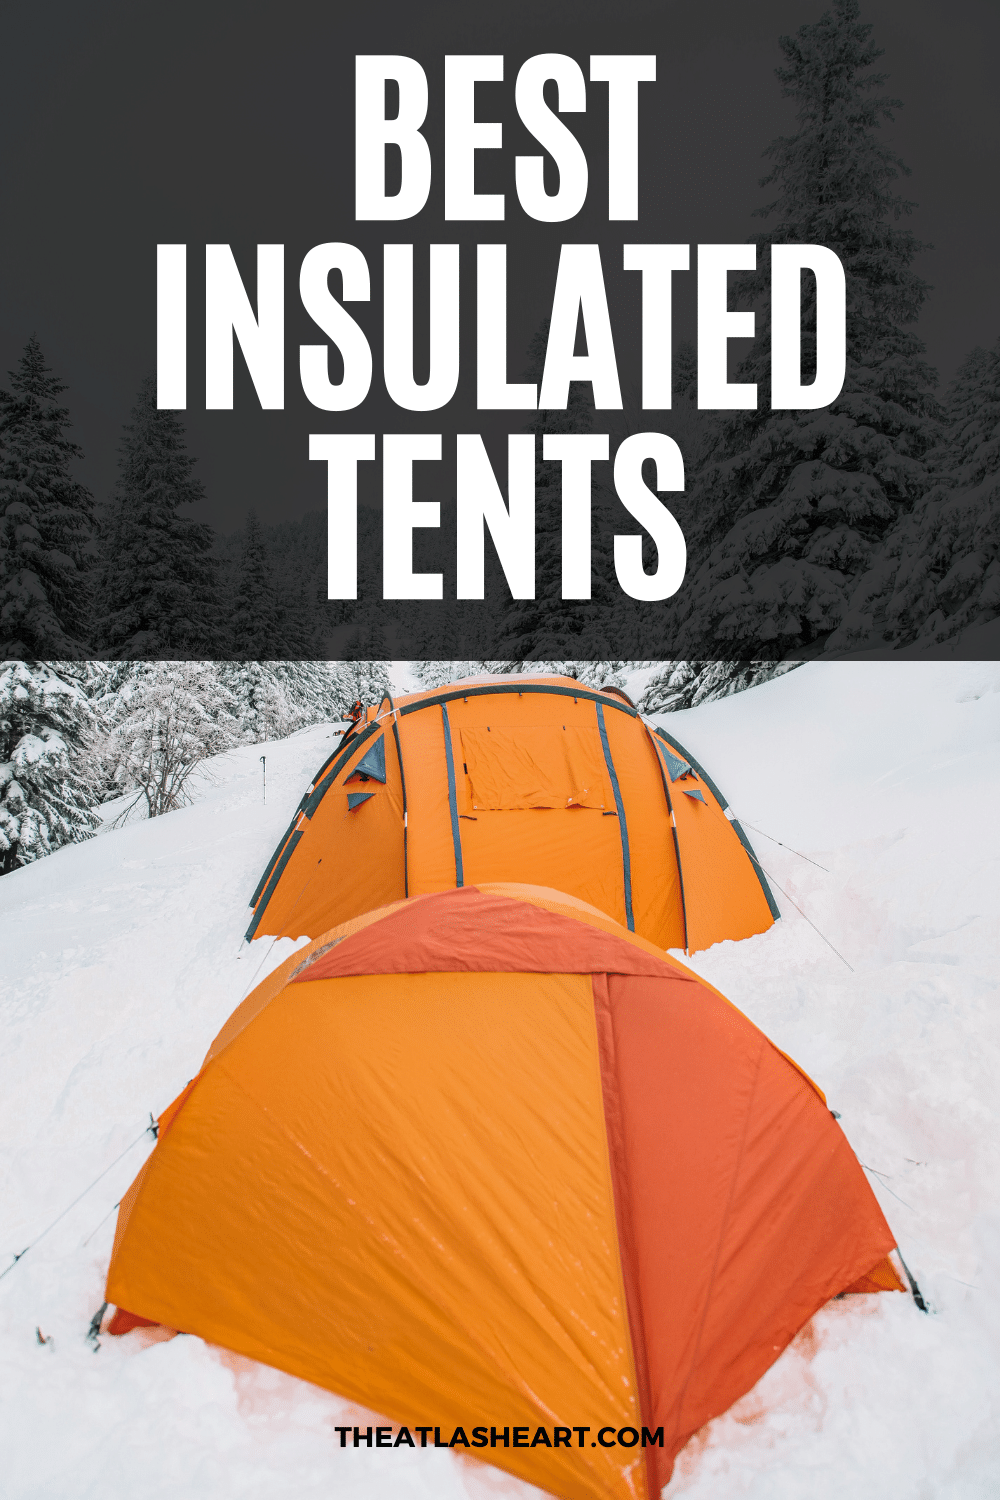 7 Best Insulated Tents to Keep You Warm in Cold Weather in 2023